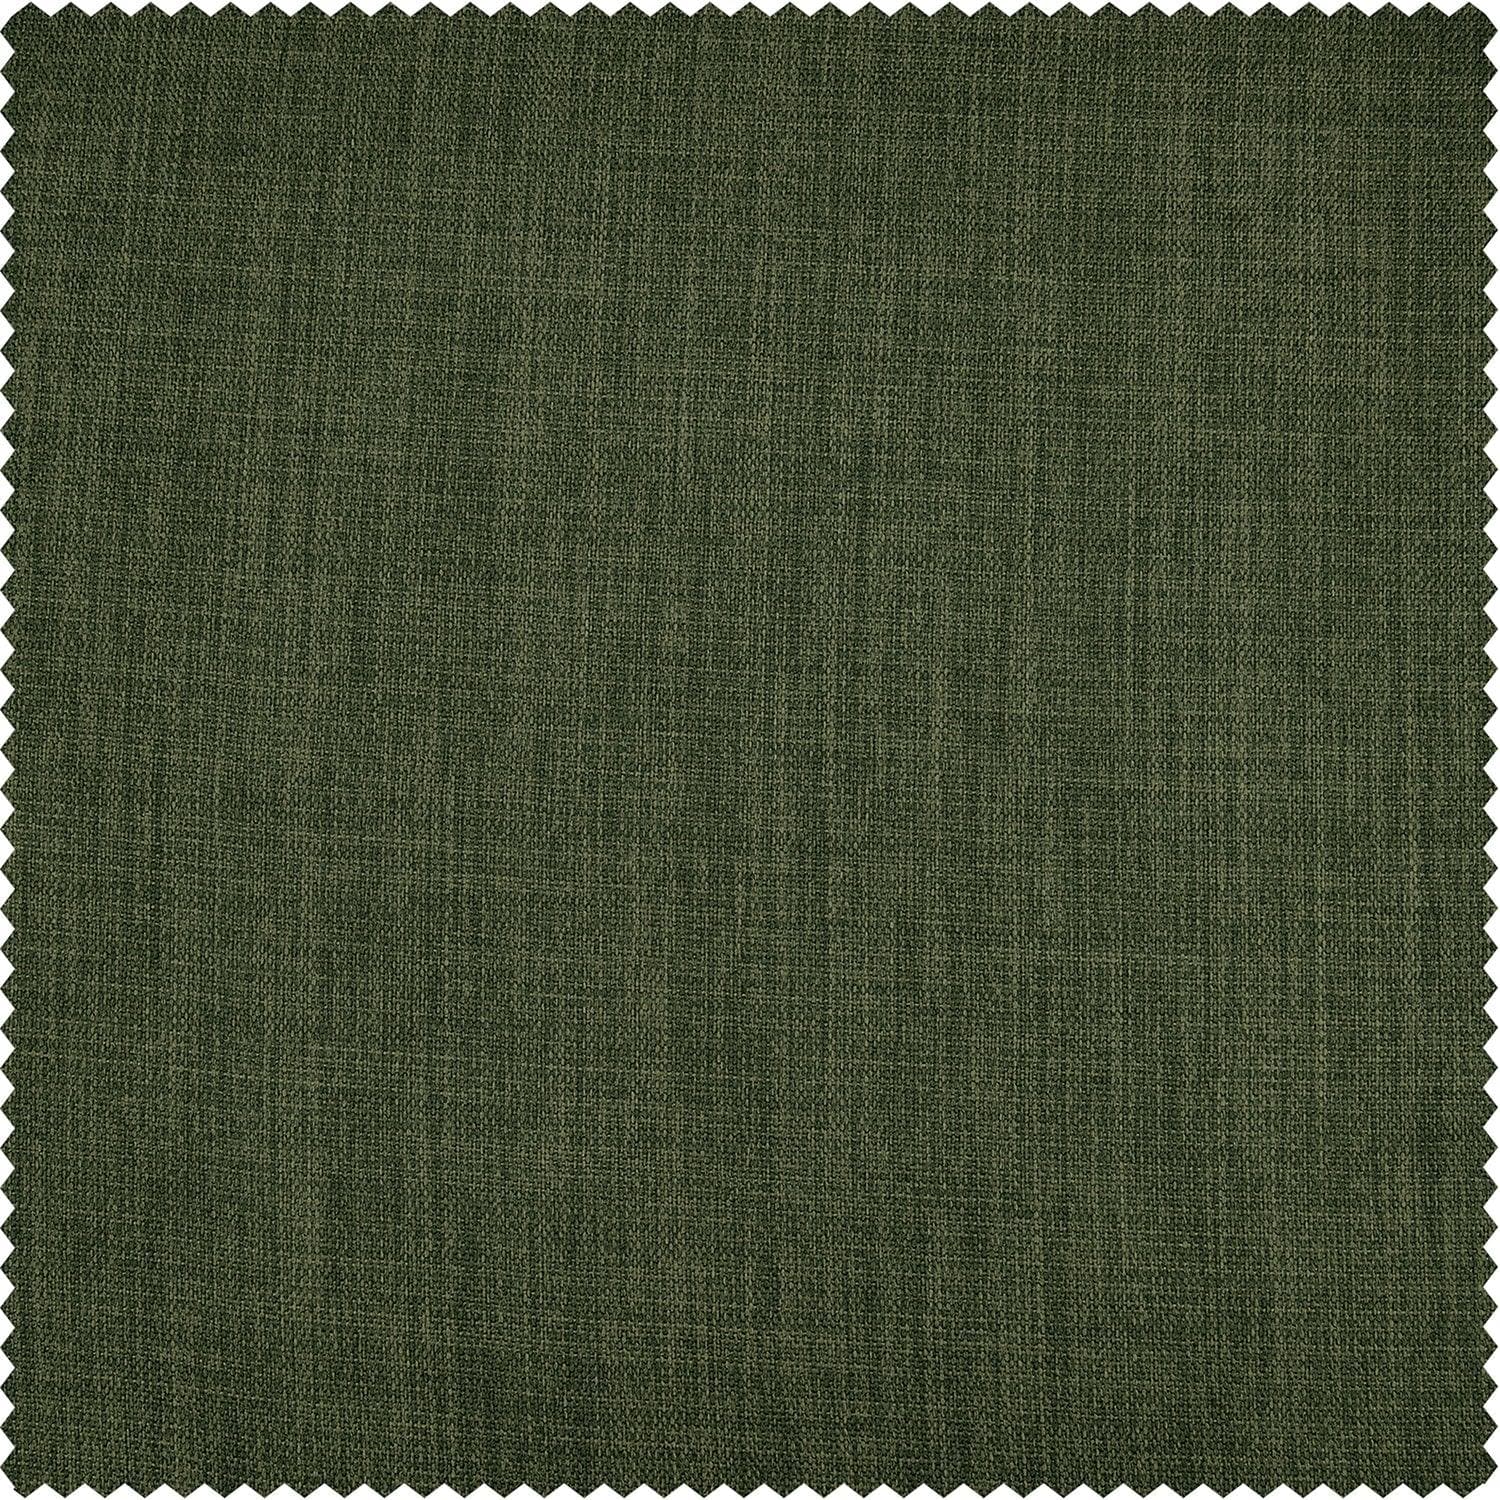 Tuscany Green Textured Faux Linen Swatch